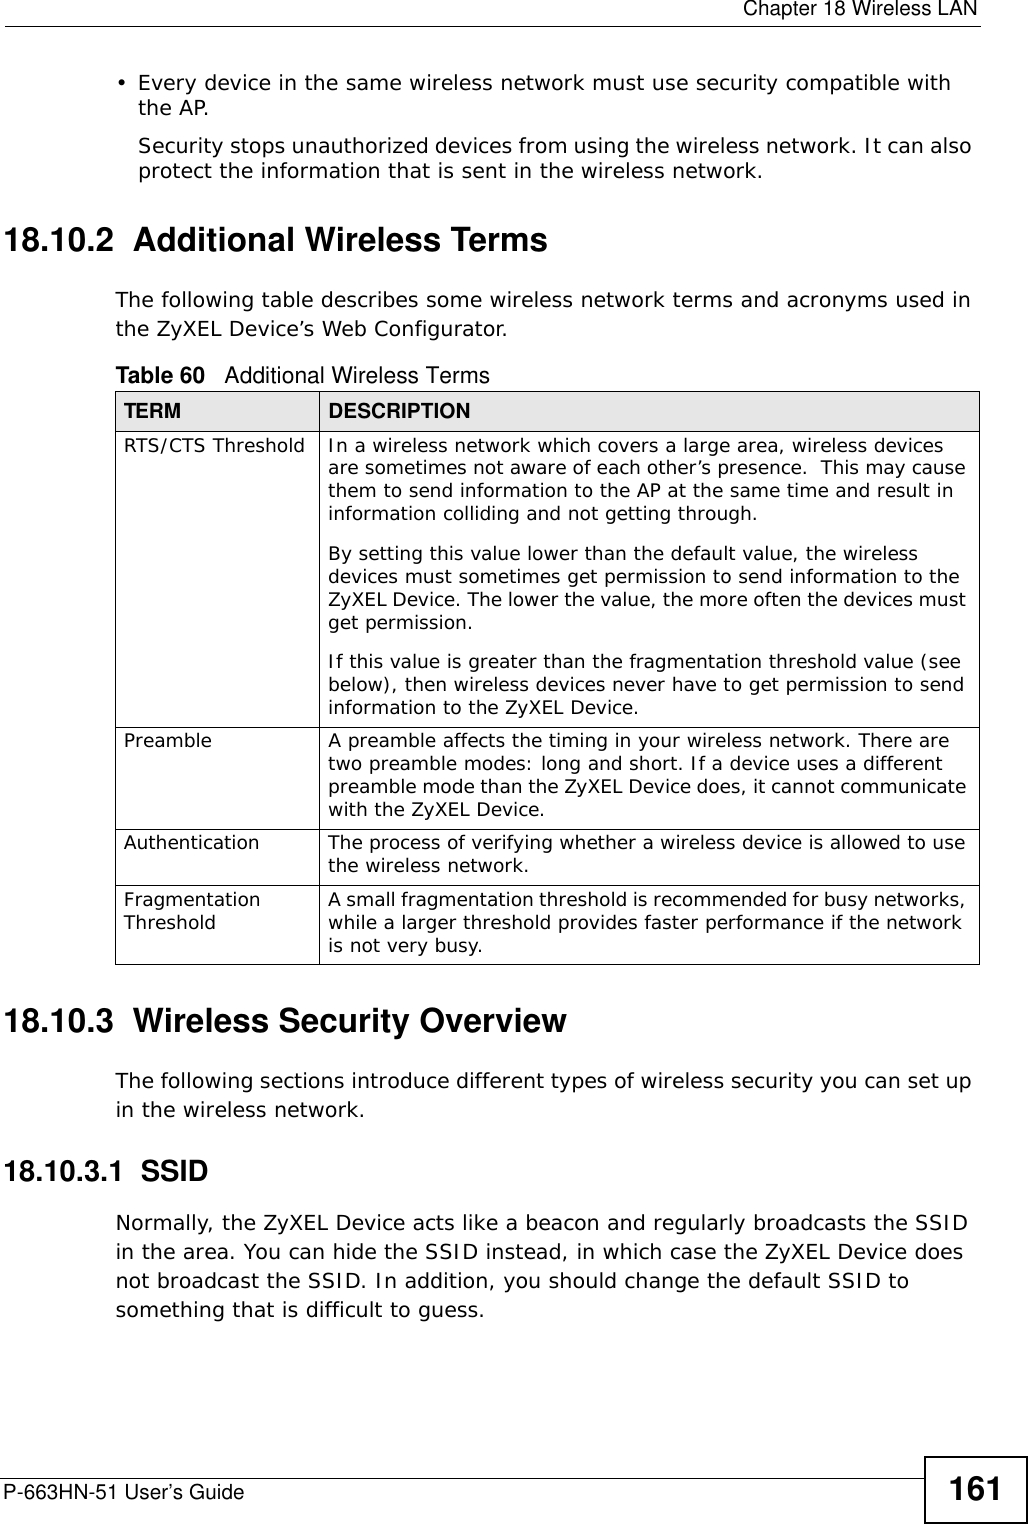  Chapter 18 Wireless LANP-663HN-51 User’s Guide 161• Every device in the same wireless network must use security compatible with the AP.Security stops unauthorized devices from using the wireless network. It can also protect the information that is sent in the wireless network.18.10.2  Additional Wireless TermsThe following table describes some wireless network terms and acronyms used in the ZyXEL Device’s Web Configurator.18.10.3  Wireless Security OverviewThe following sections introduce different types of wireless security you can set up in the wireless network.18.10.3.1  SSIDNormally, the ZyXEL Device acts like a beacon and regularly broadcasts the SSID in the area. You can hide the SSID instead, in which case the ZyXEL Device does not broadcast the SSID. In addition, you should change the default SSID to something that is difficult to guess.Table 60   Additional Wireless TermsTERM DESCRIPTIONRTS/CTS Threshold In a wireless network which covers a large area, wireless devices are sometimes not aware of each other’s presence.  This may cause them to send information to the AP at the same time and result in information colliding and not getting through.By setting this value lower than the default value, the wireless devices must sometimes get permission to send information to the ZyXEL Device. The lower the value, the more often the devices must get permission.If this value is greater than the fragmentation threshold value (see below), then wireless devices never have to get permission to send information to the ZyXEL Device.Preamble A preamble affects the timing in your wireless network. There are two preamble modes: long and short. If a device uses a different preamble mode than the ZyXEL Device does, it cannot communicate with the ZyXEL Device.Authentication The process of verifying whether a wireless device is allowed to use the wireless network.Fragmentation Threshold A small fragmentation threshold is recommended for busy networks, while a larger threshold provides faster performance if the network is not very busy.